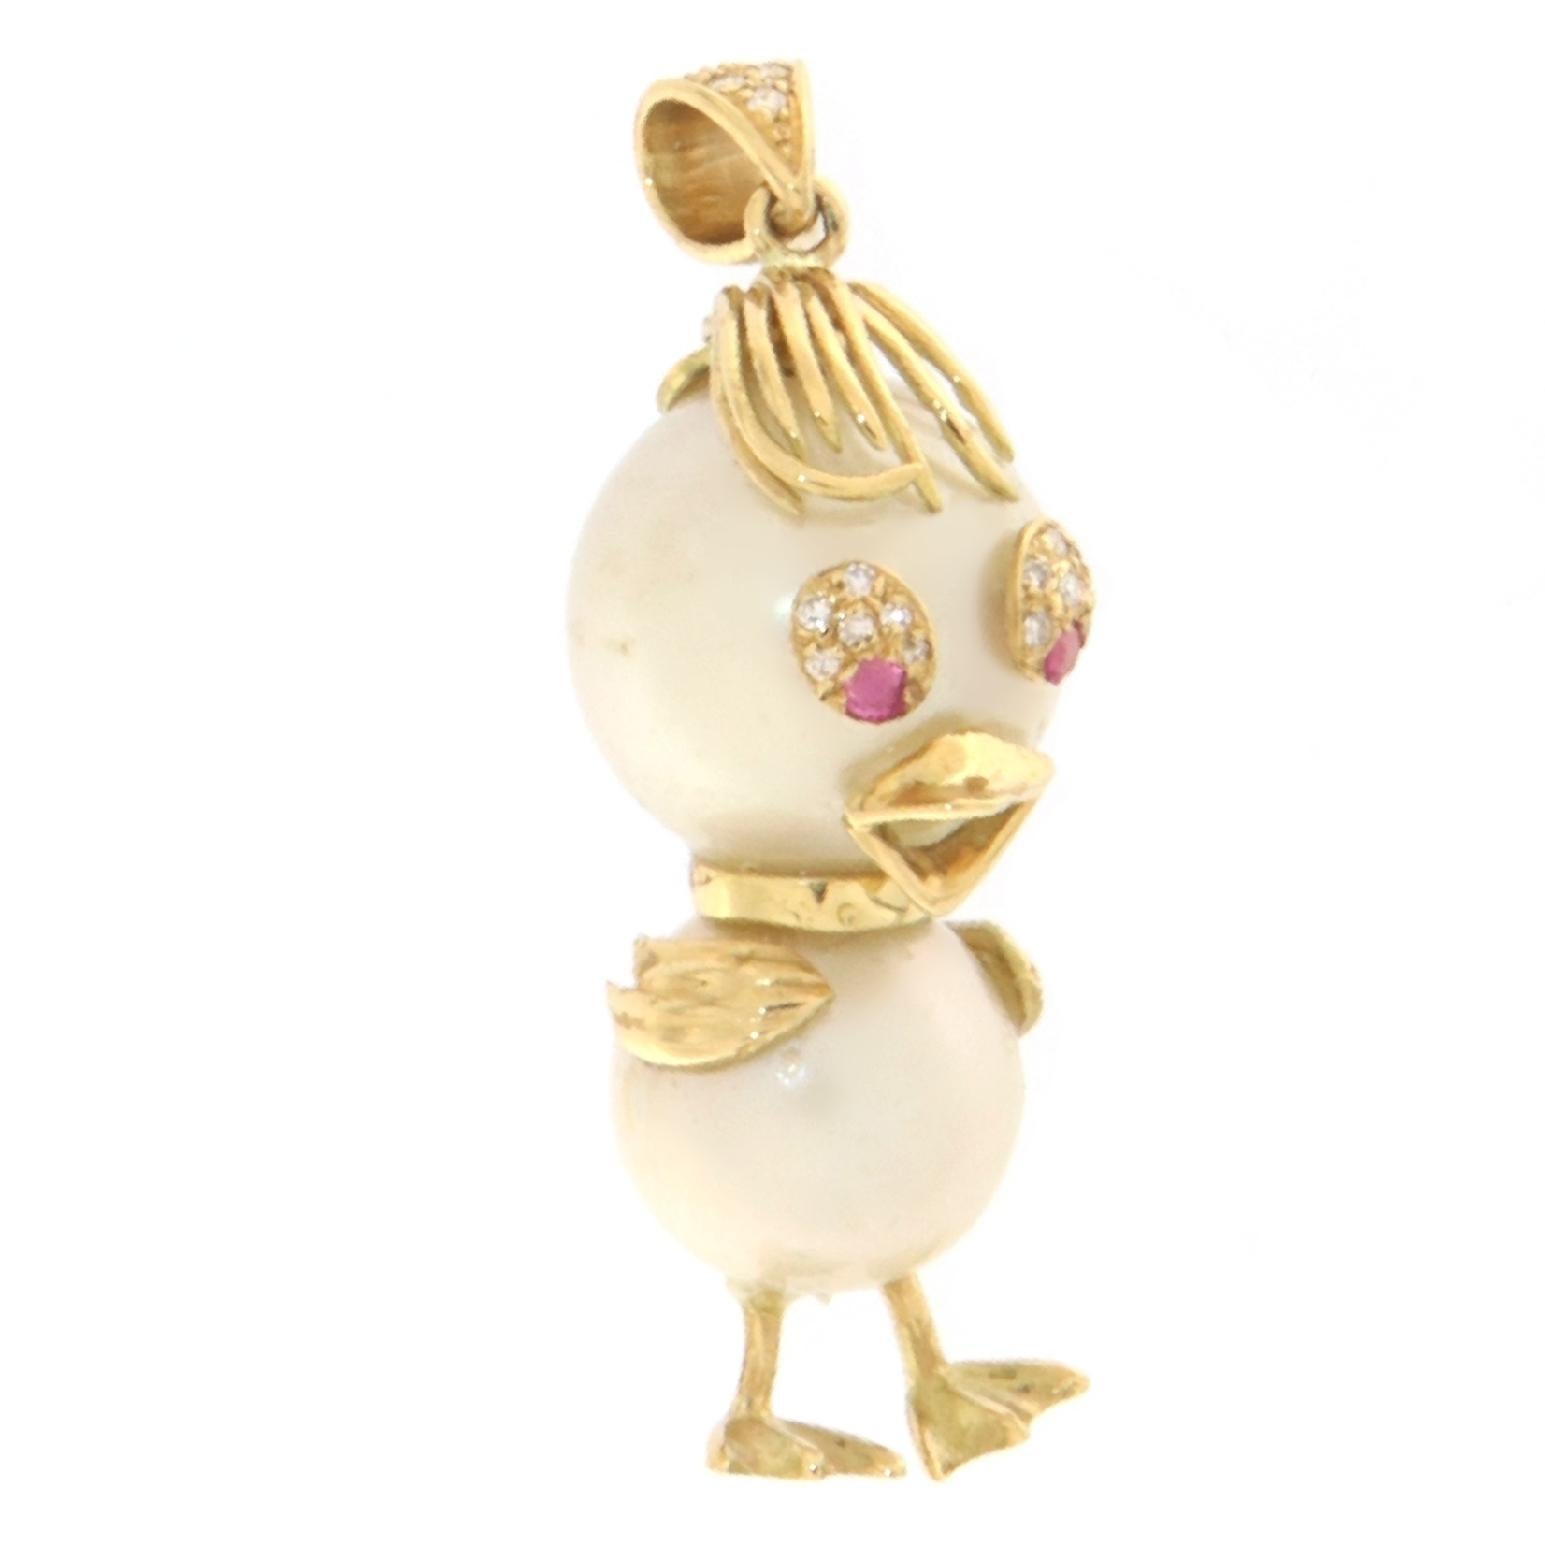 This charming duck-shaped pendant, crafted in 18-karat yellow gold, is a joyful expression of creativity and masterful craftsmanship. The innovative design utilizes two pearls to represent the main parts of the duck: one for the head and another for